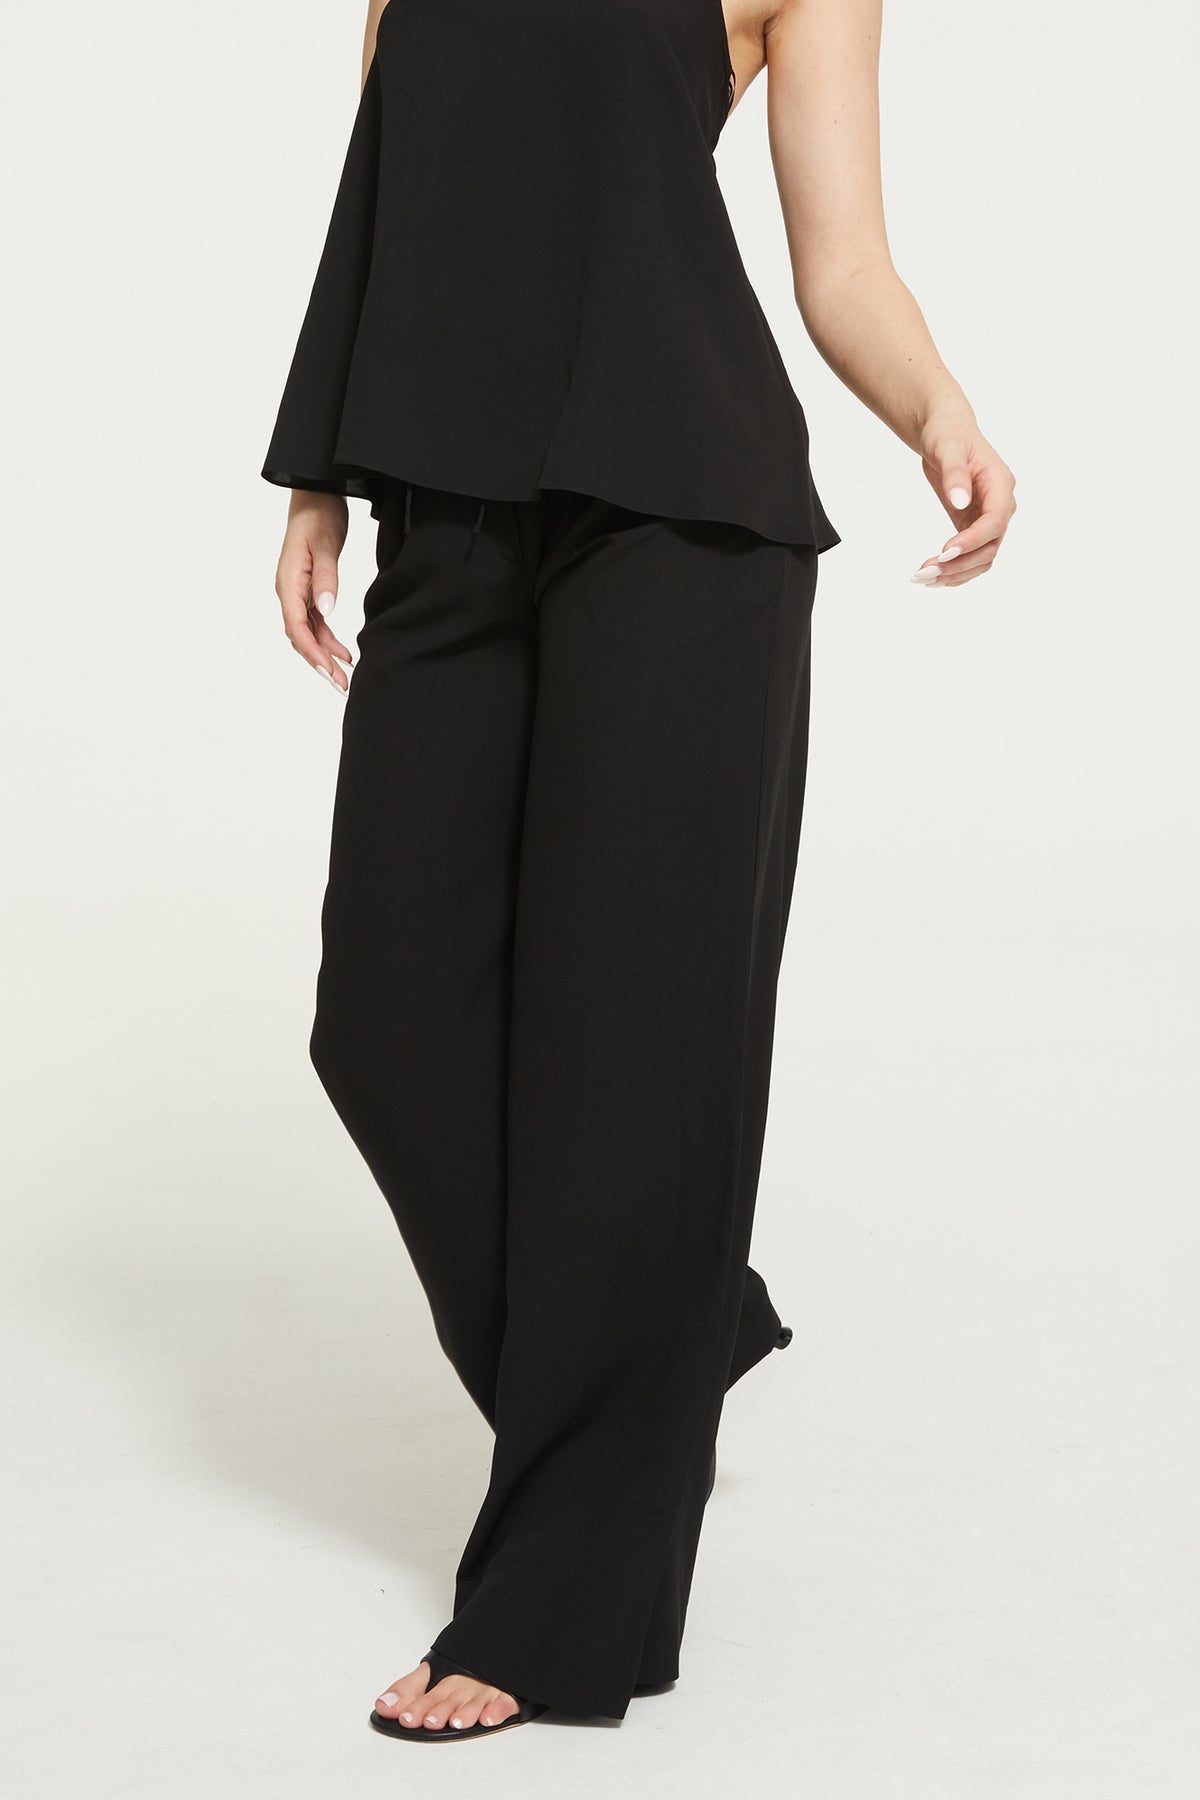 The Samba Pants in Black by Ginia RTW